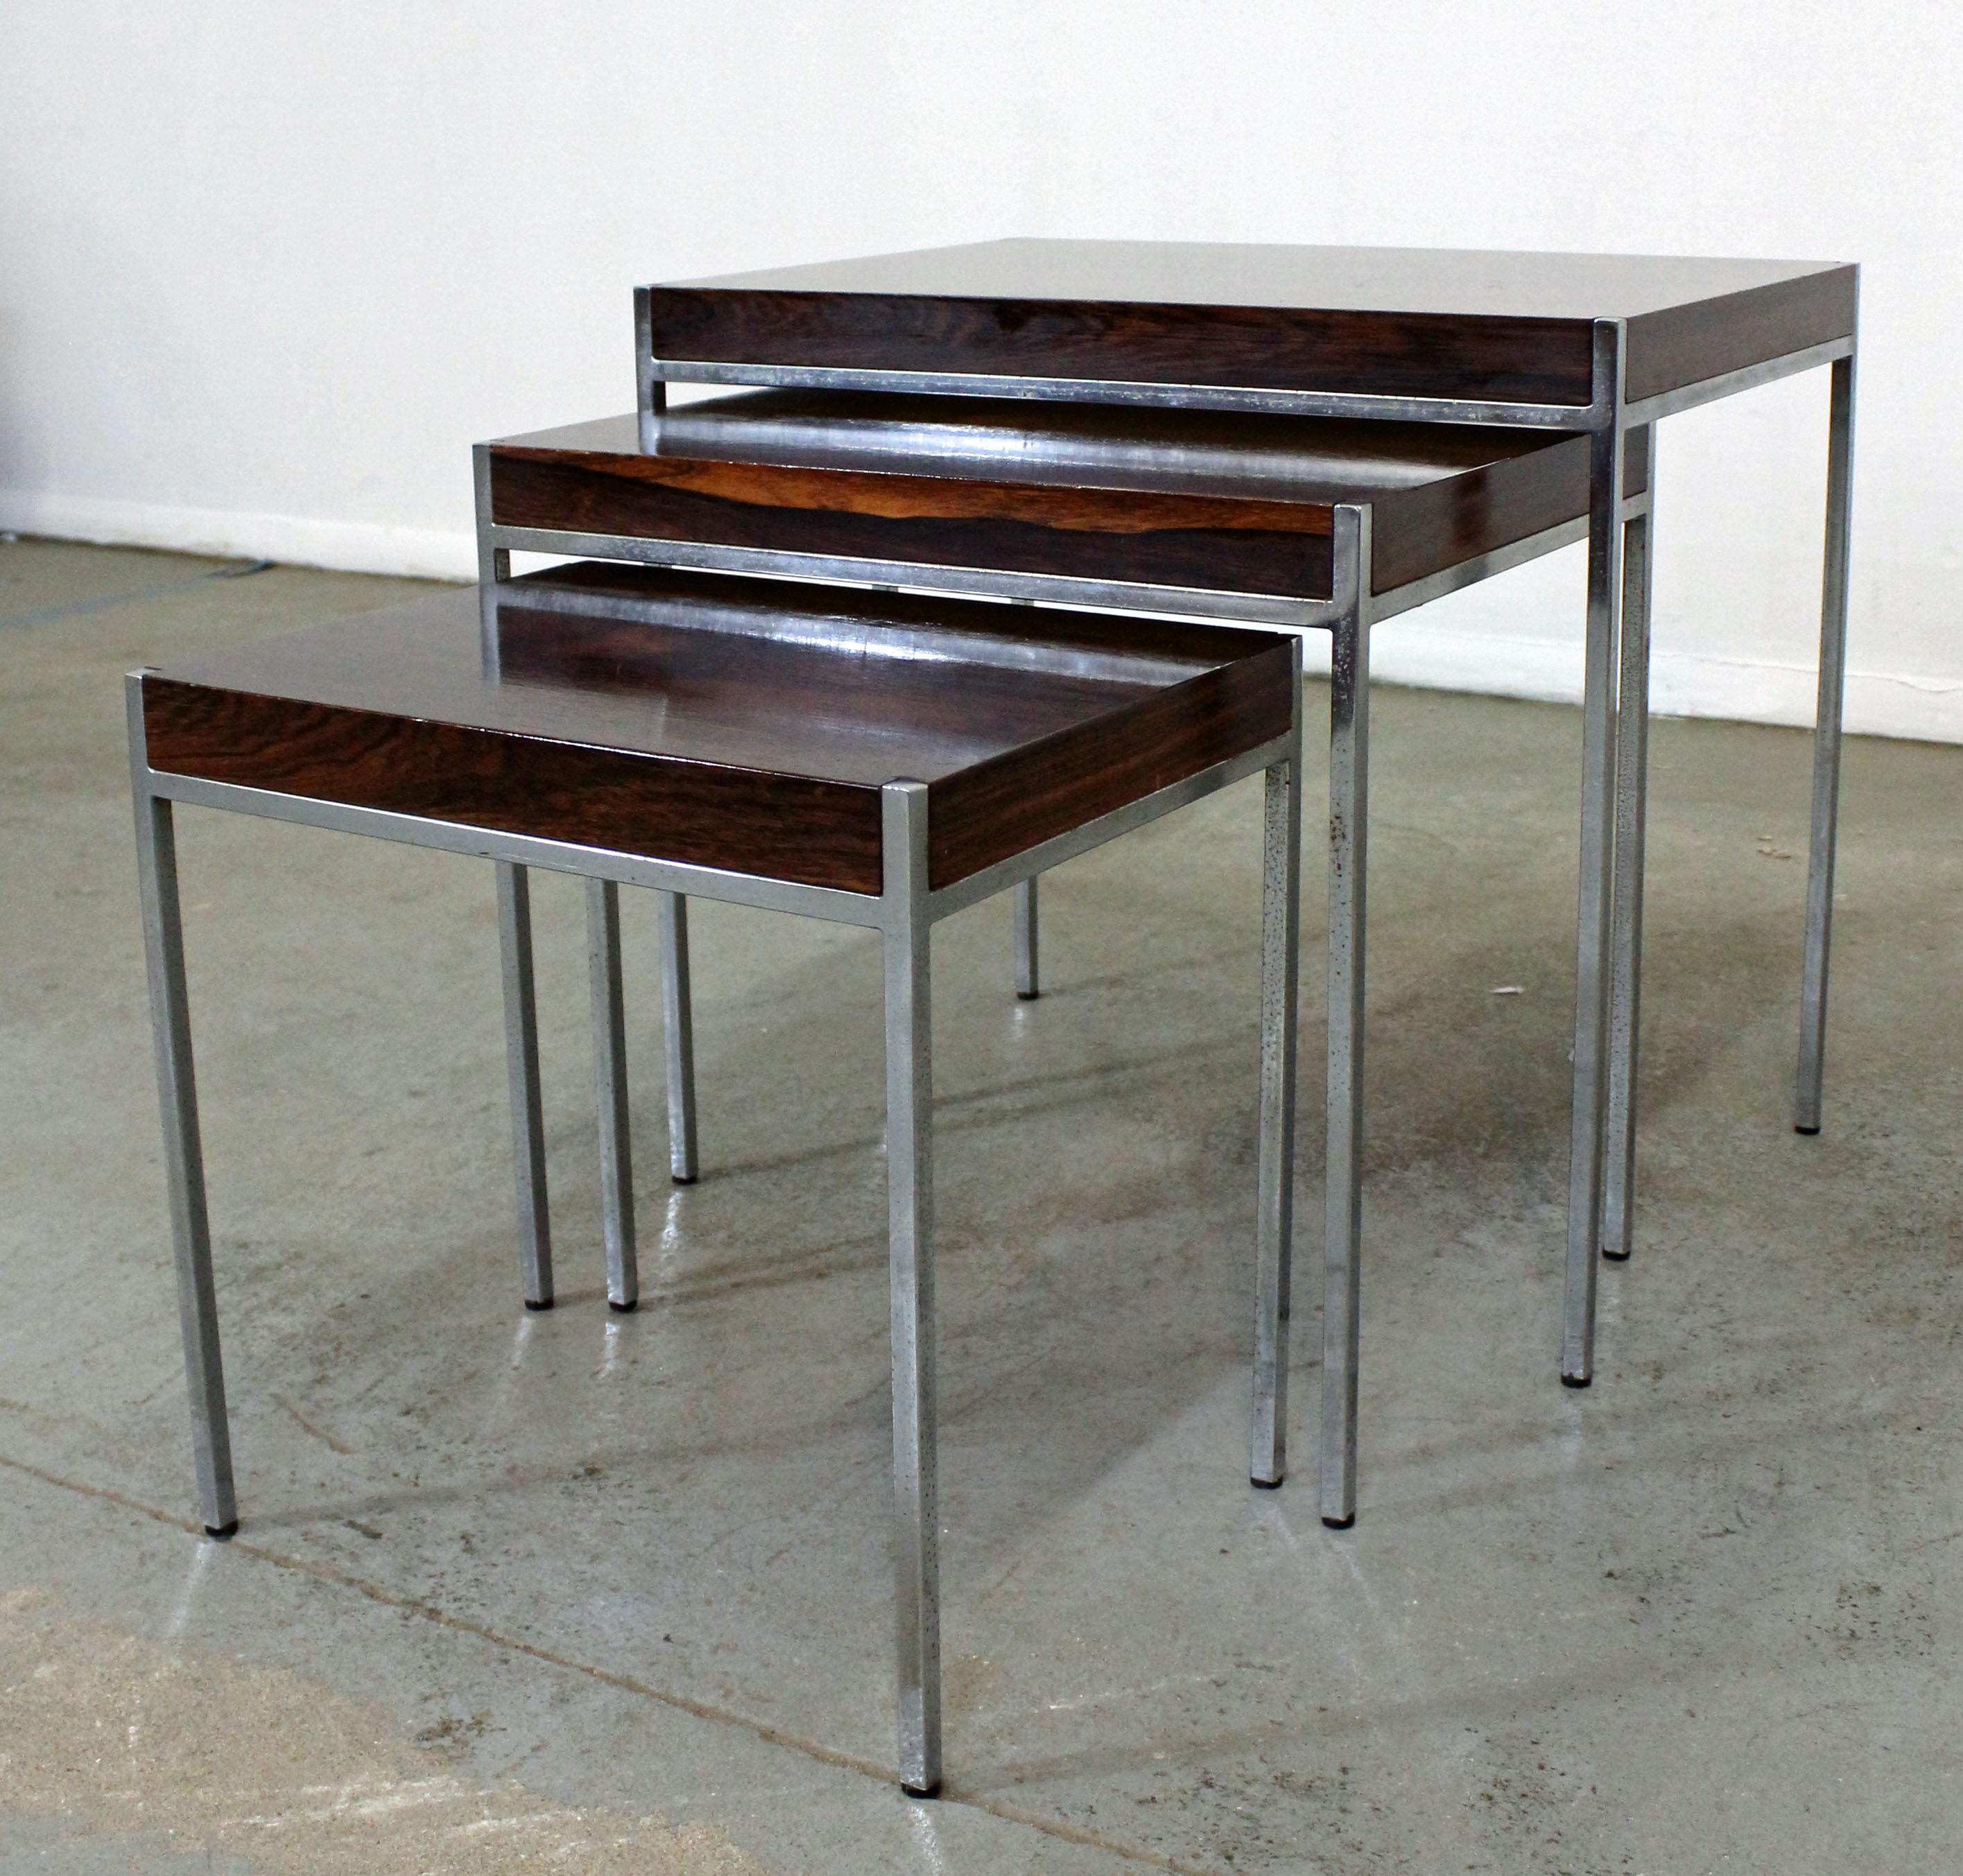 What a find. Offered is a set of 3 rosewood & chrome nesting tables. They are in good condition showing some age wear (patina on legs, surface scratches). We believe they may be by Milo Baughman, but they are not signed. Check out our other listing